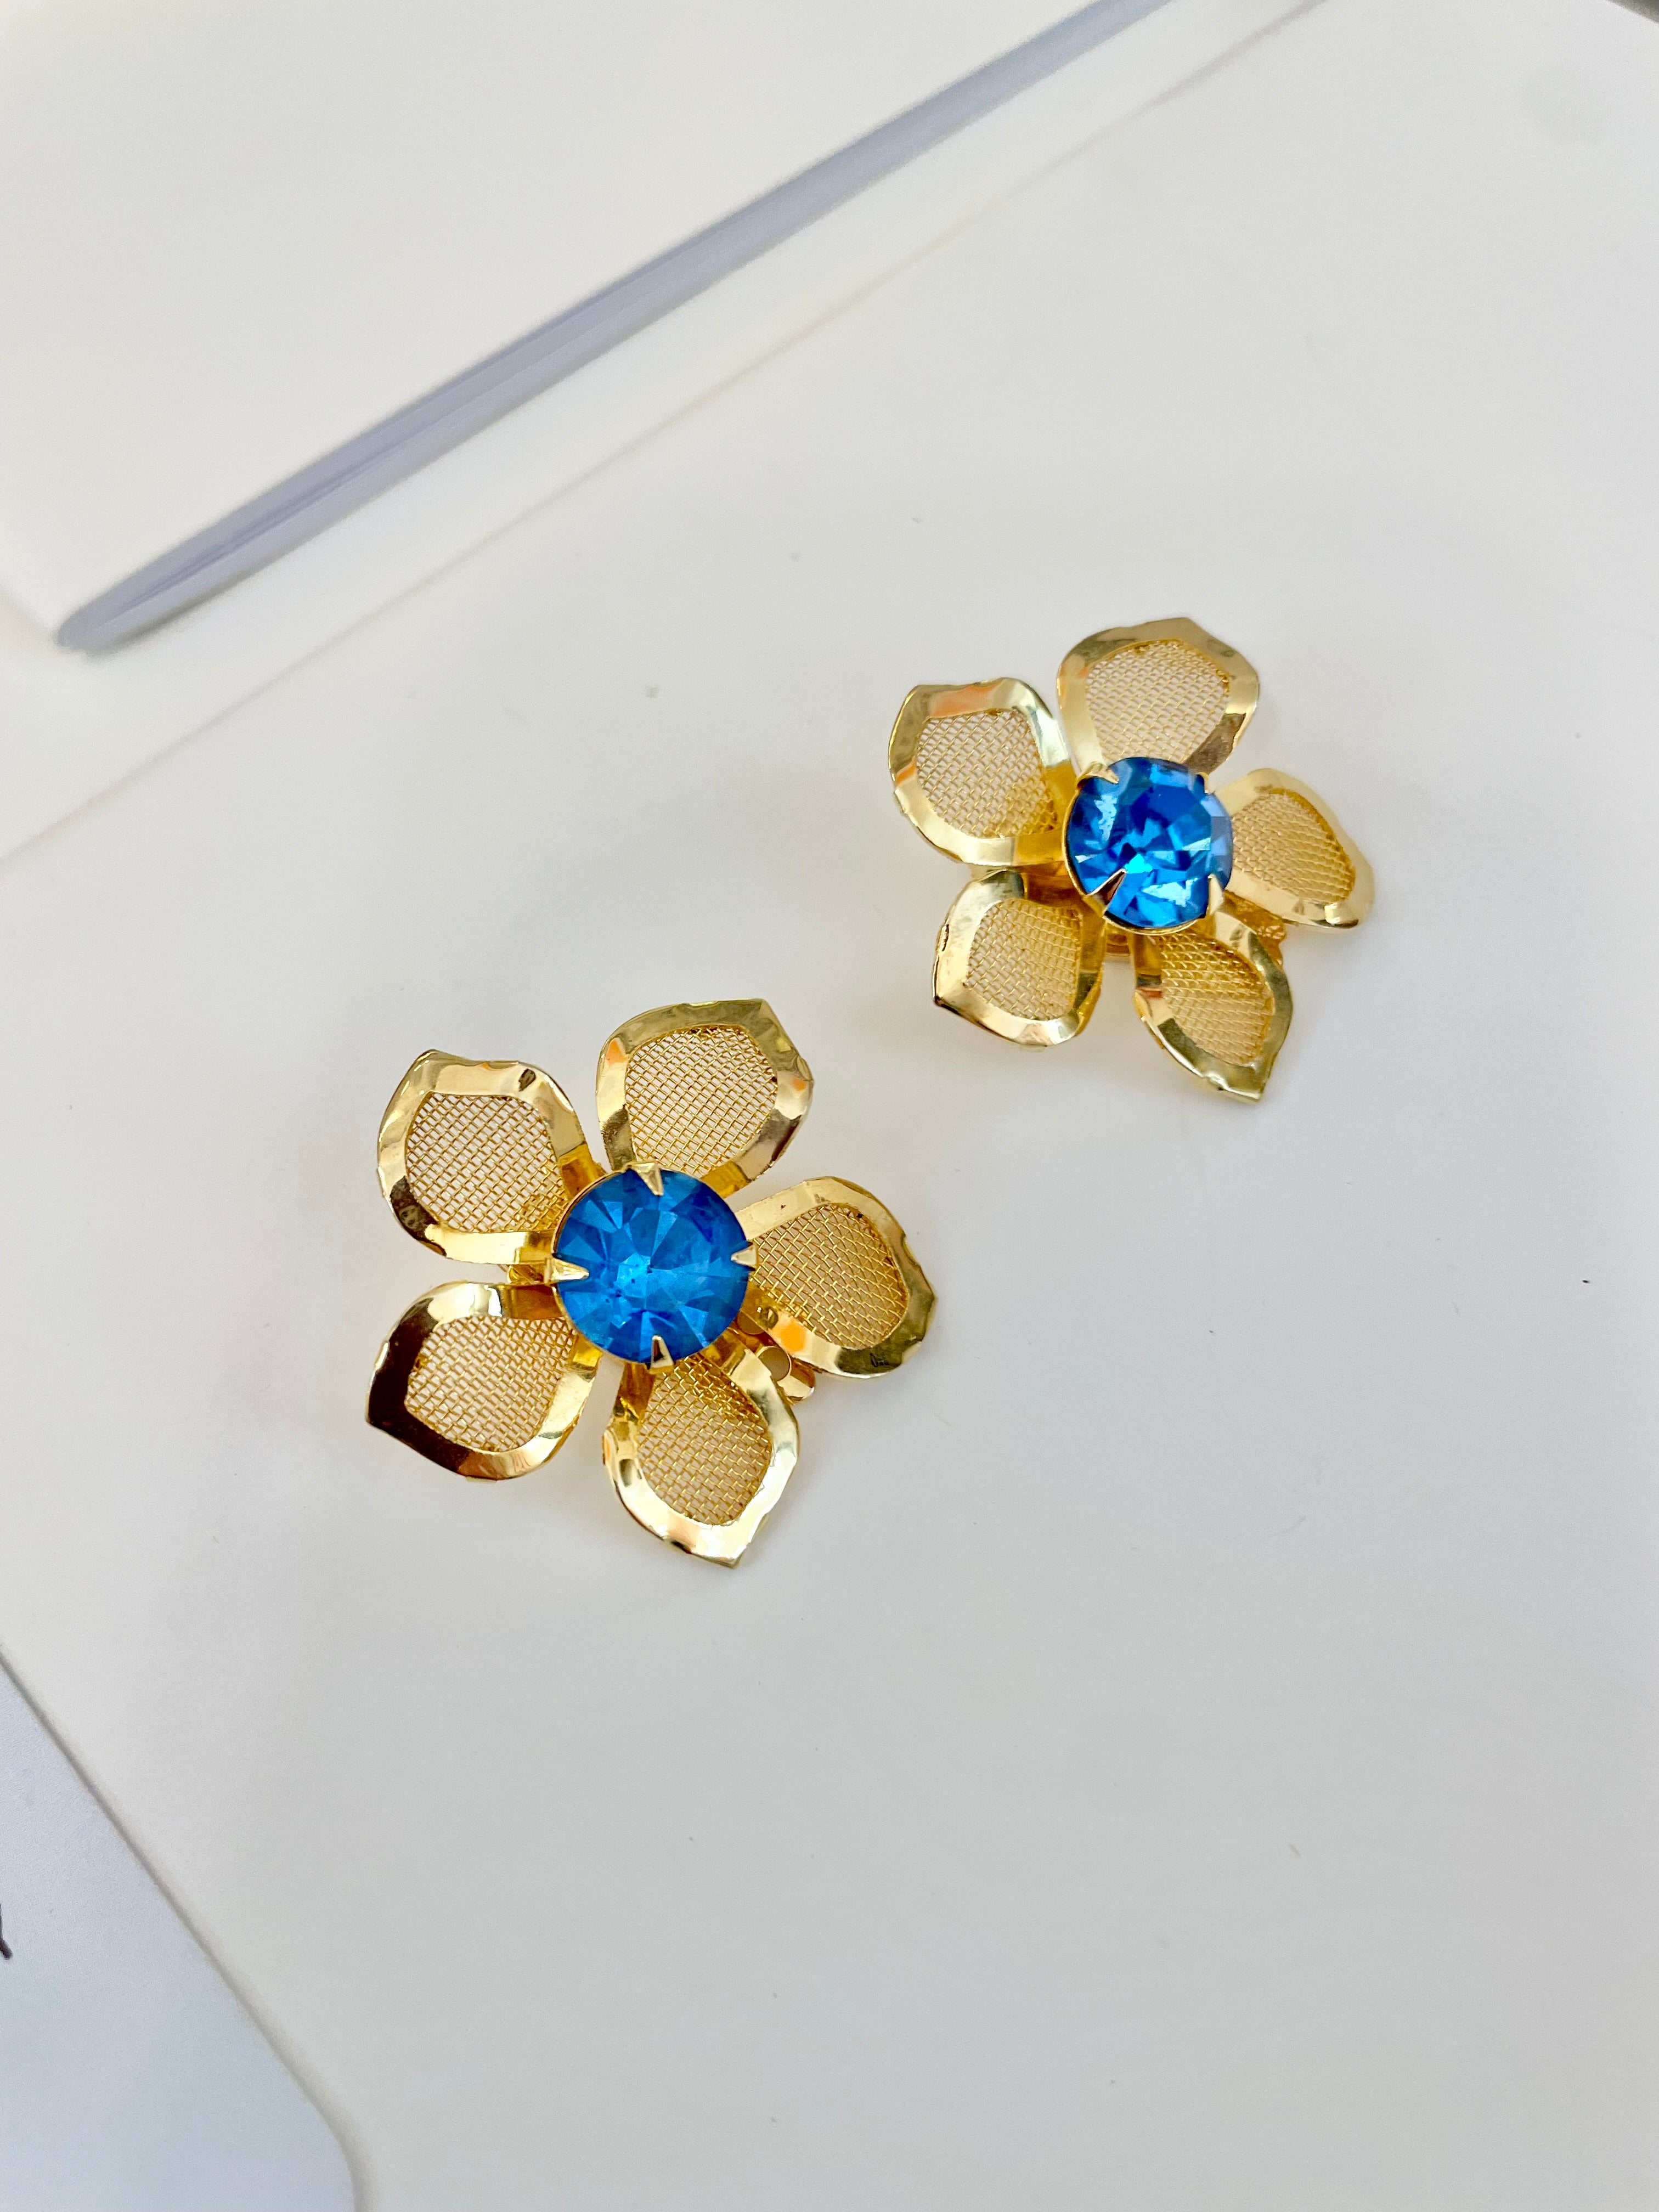 The most classy gold flower earrings ..... so chic